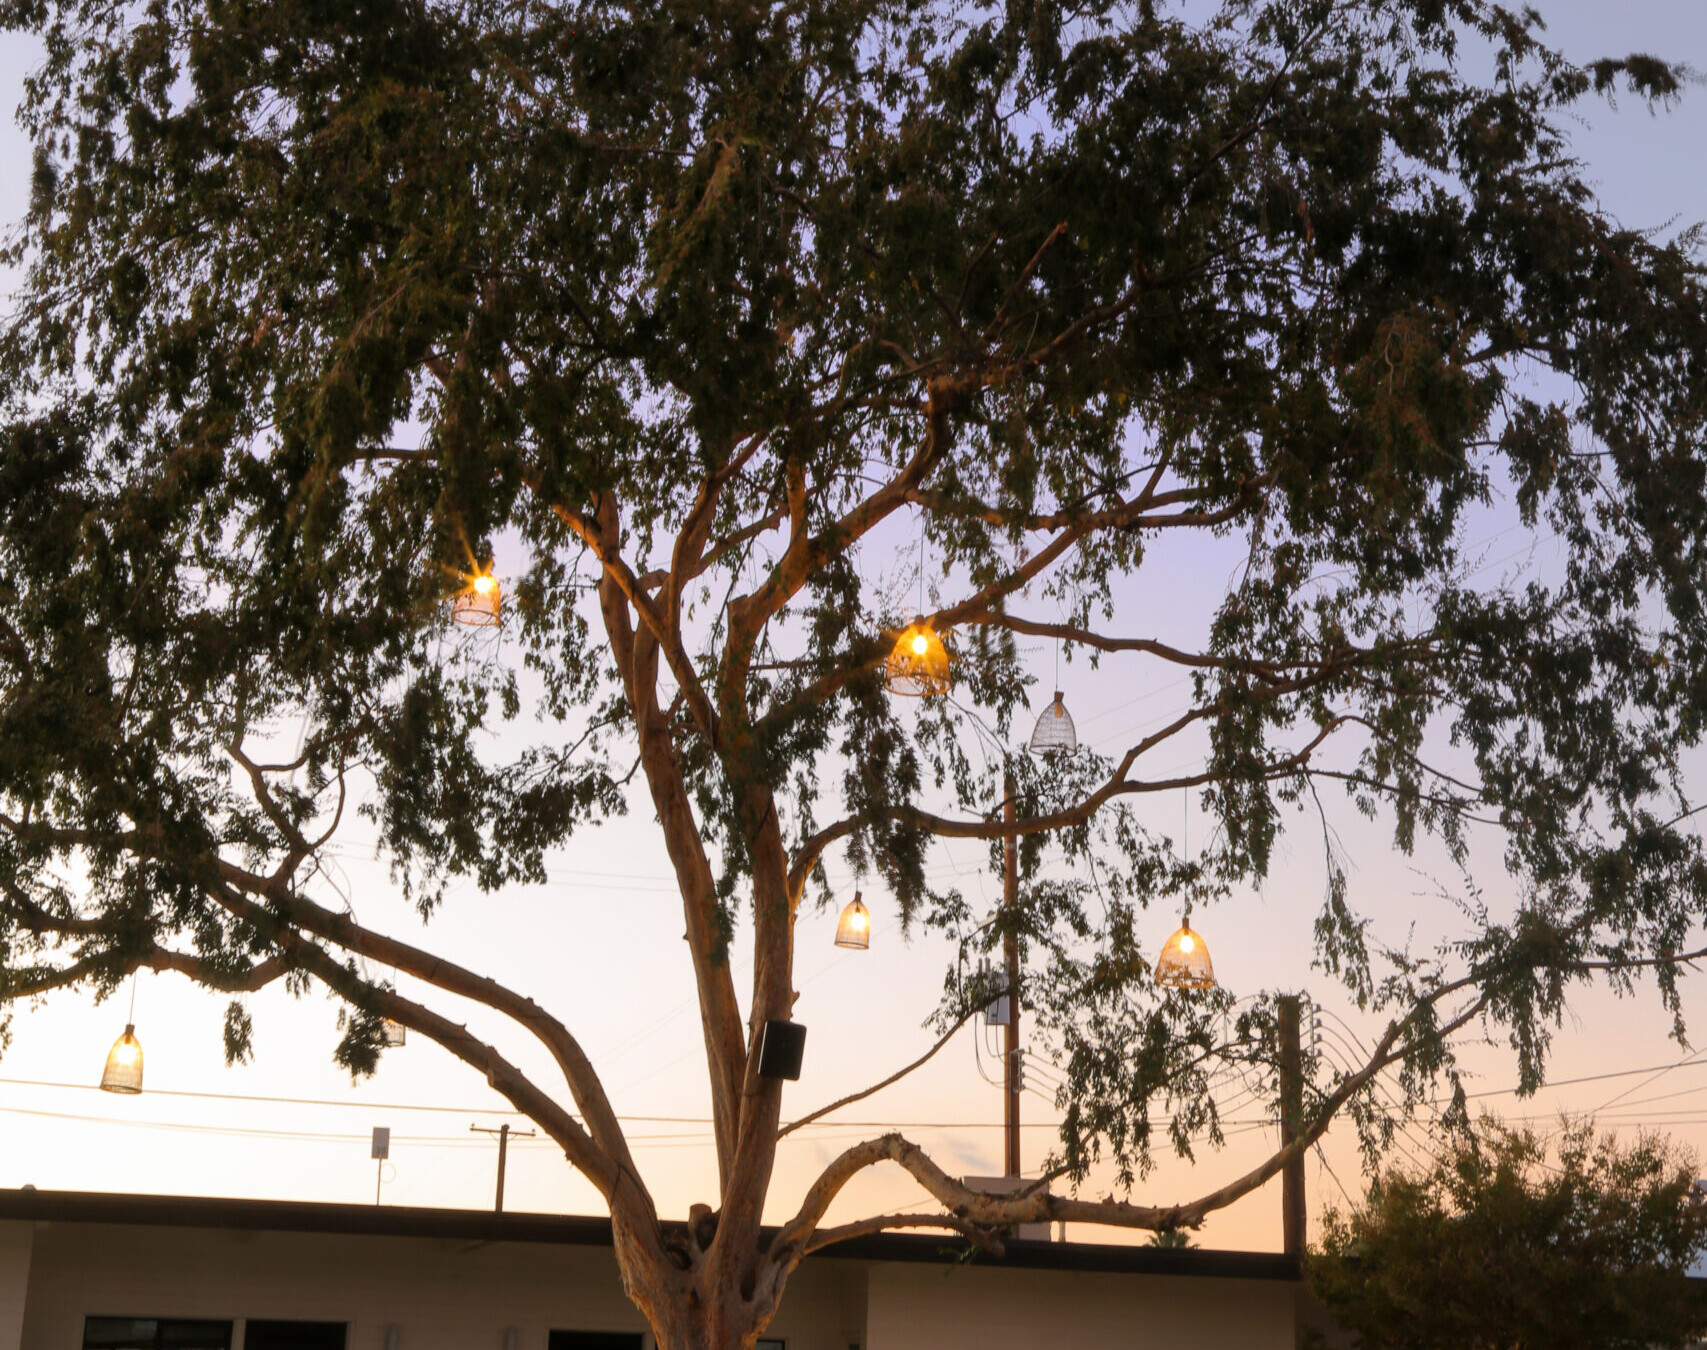 Sunset view of a mature tree with several shining chandeliers hung in it in New Cuyama, California.